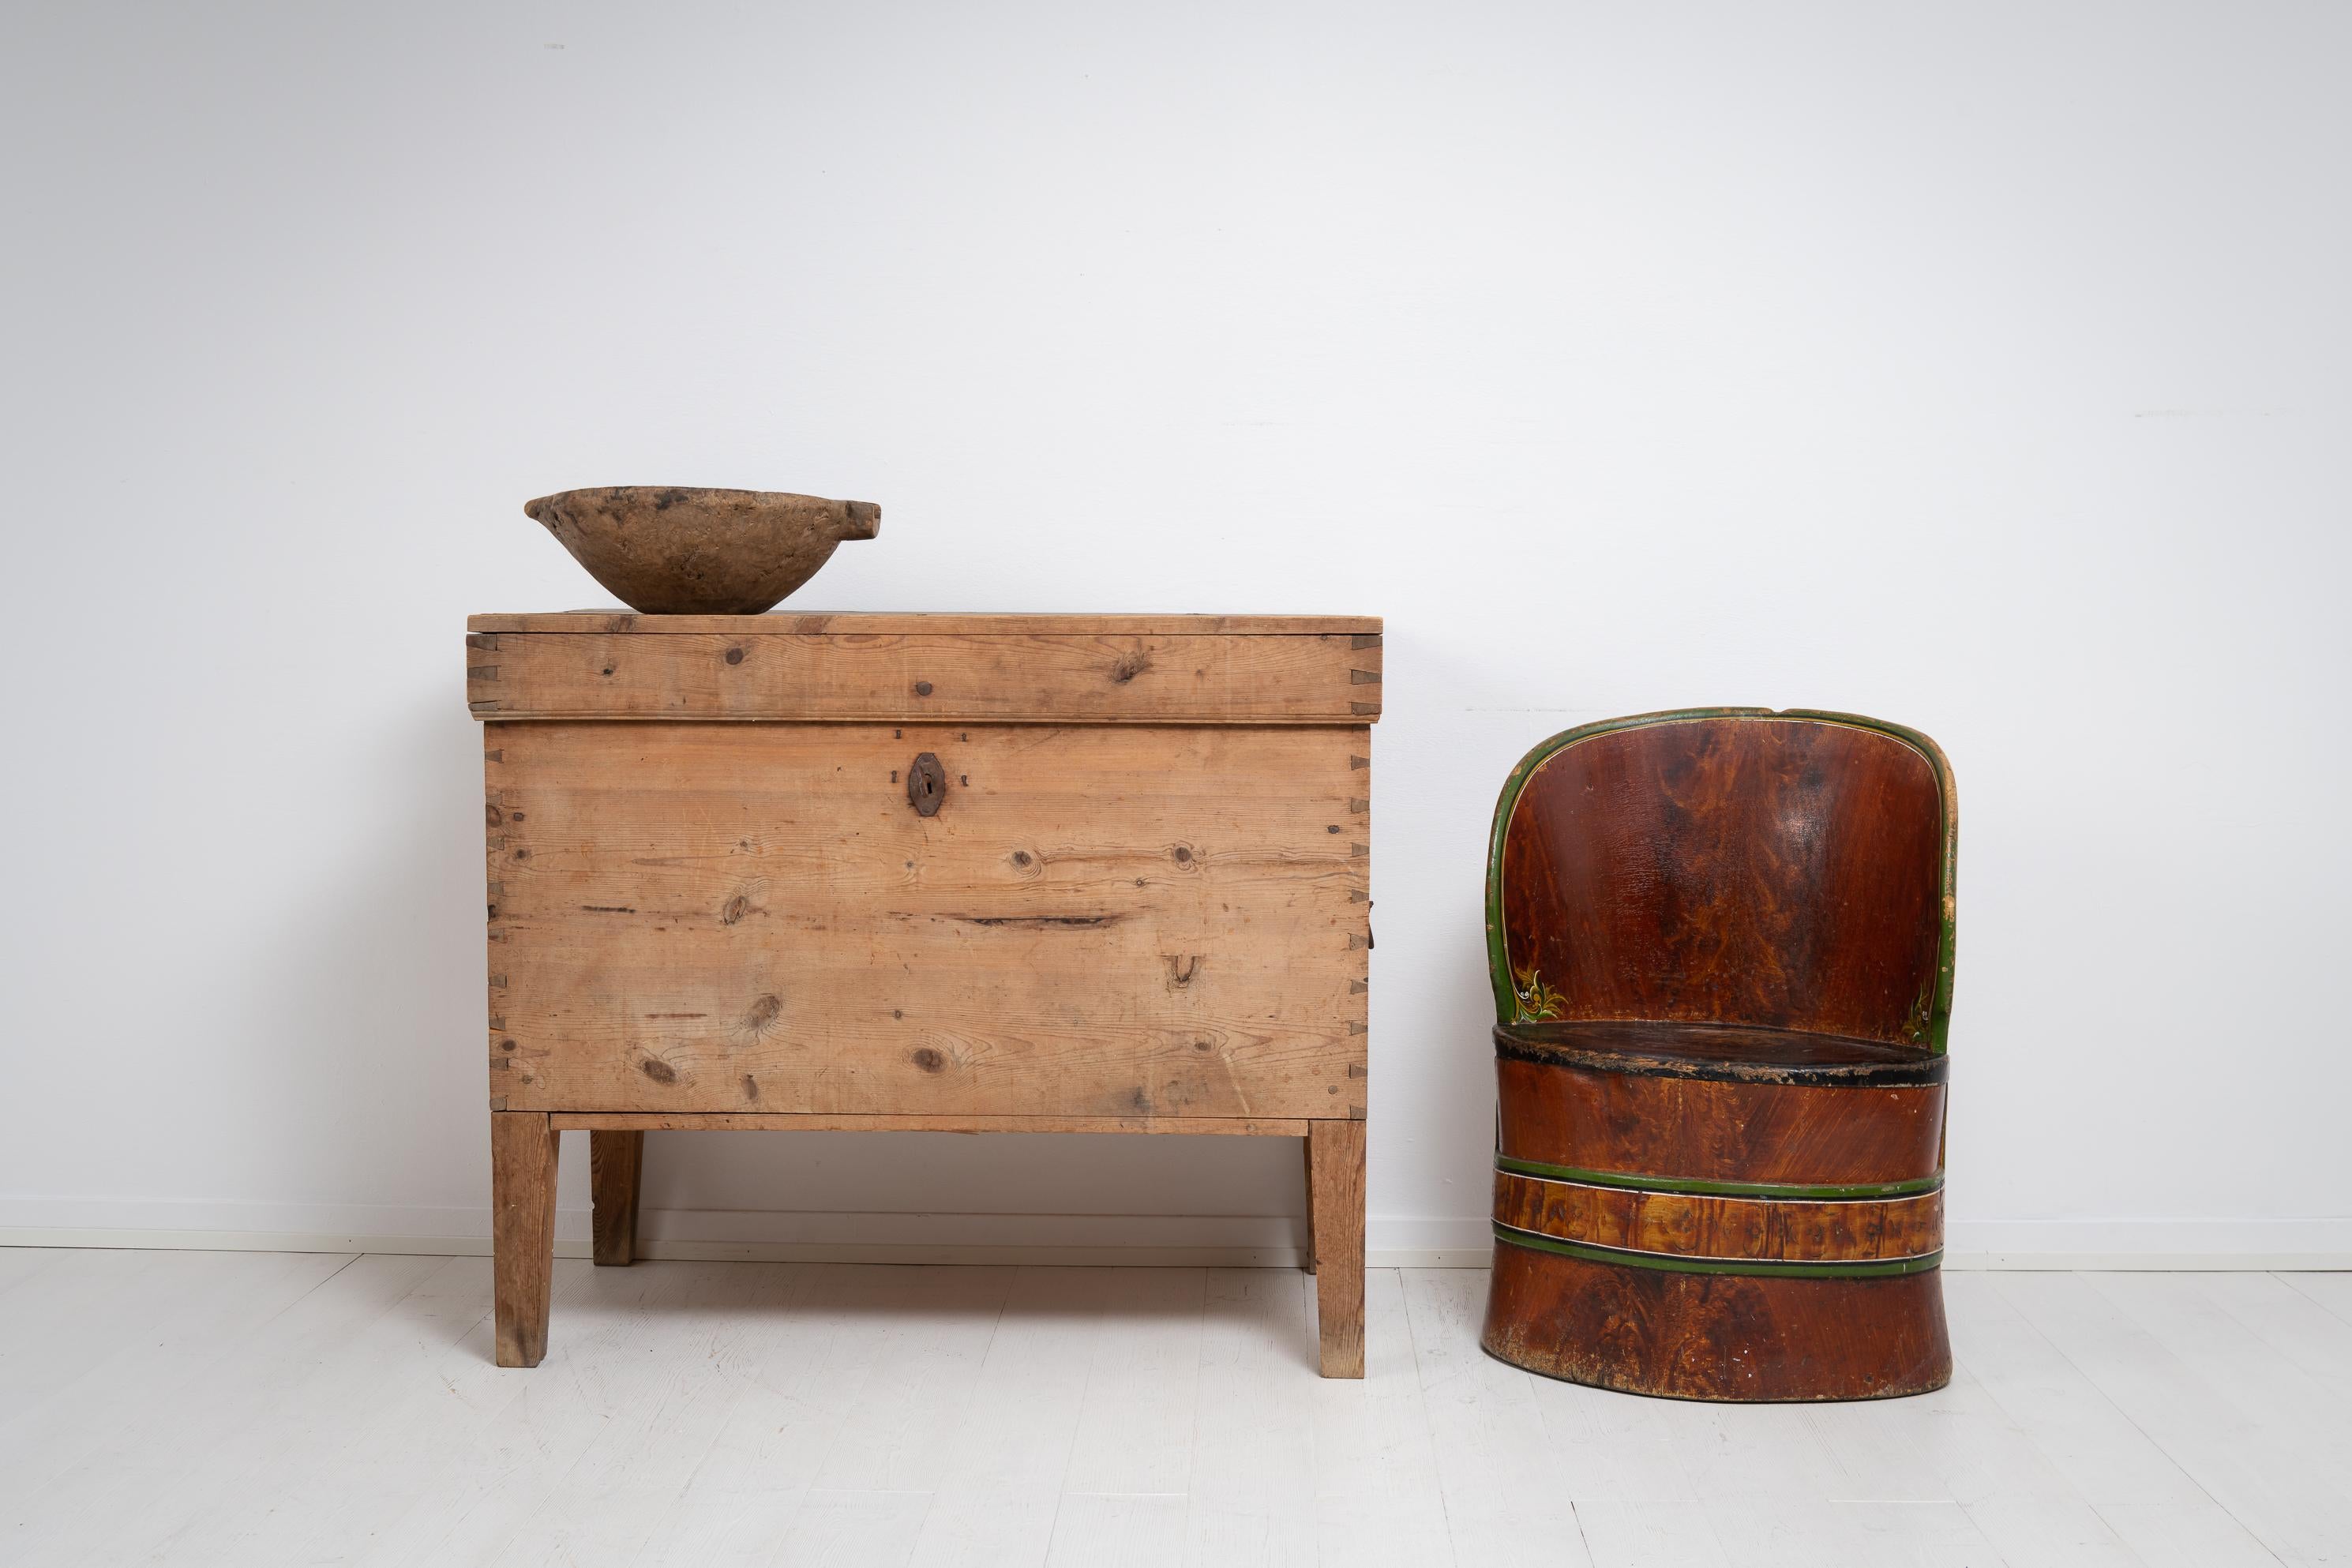 Swedish storage or blanket chest with tall legs from the mid 1800s made in wood bare pine. The chest is from Northern Sweden and has a dating on the inside of the lid, 11/7 1866 for July 11th 1866. The wood is never painted so it has naturally